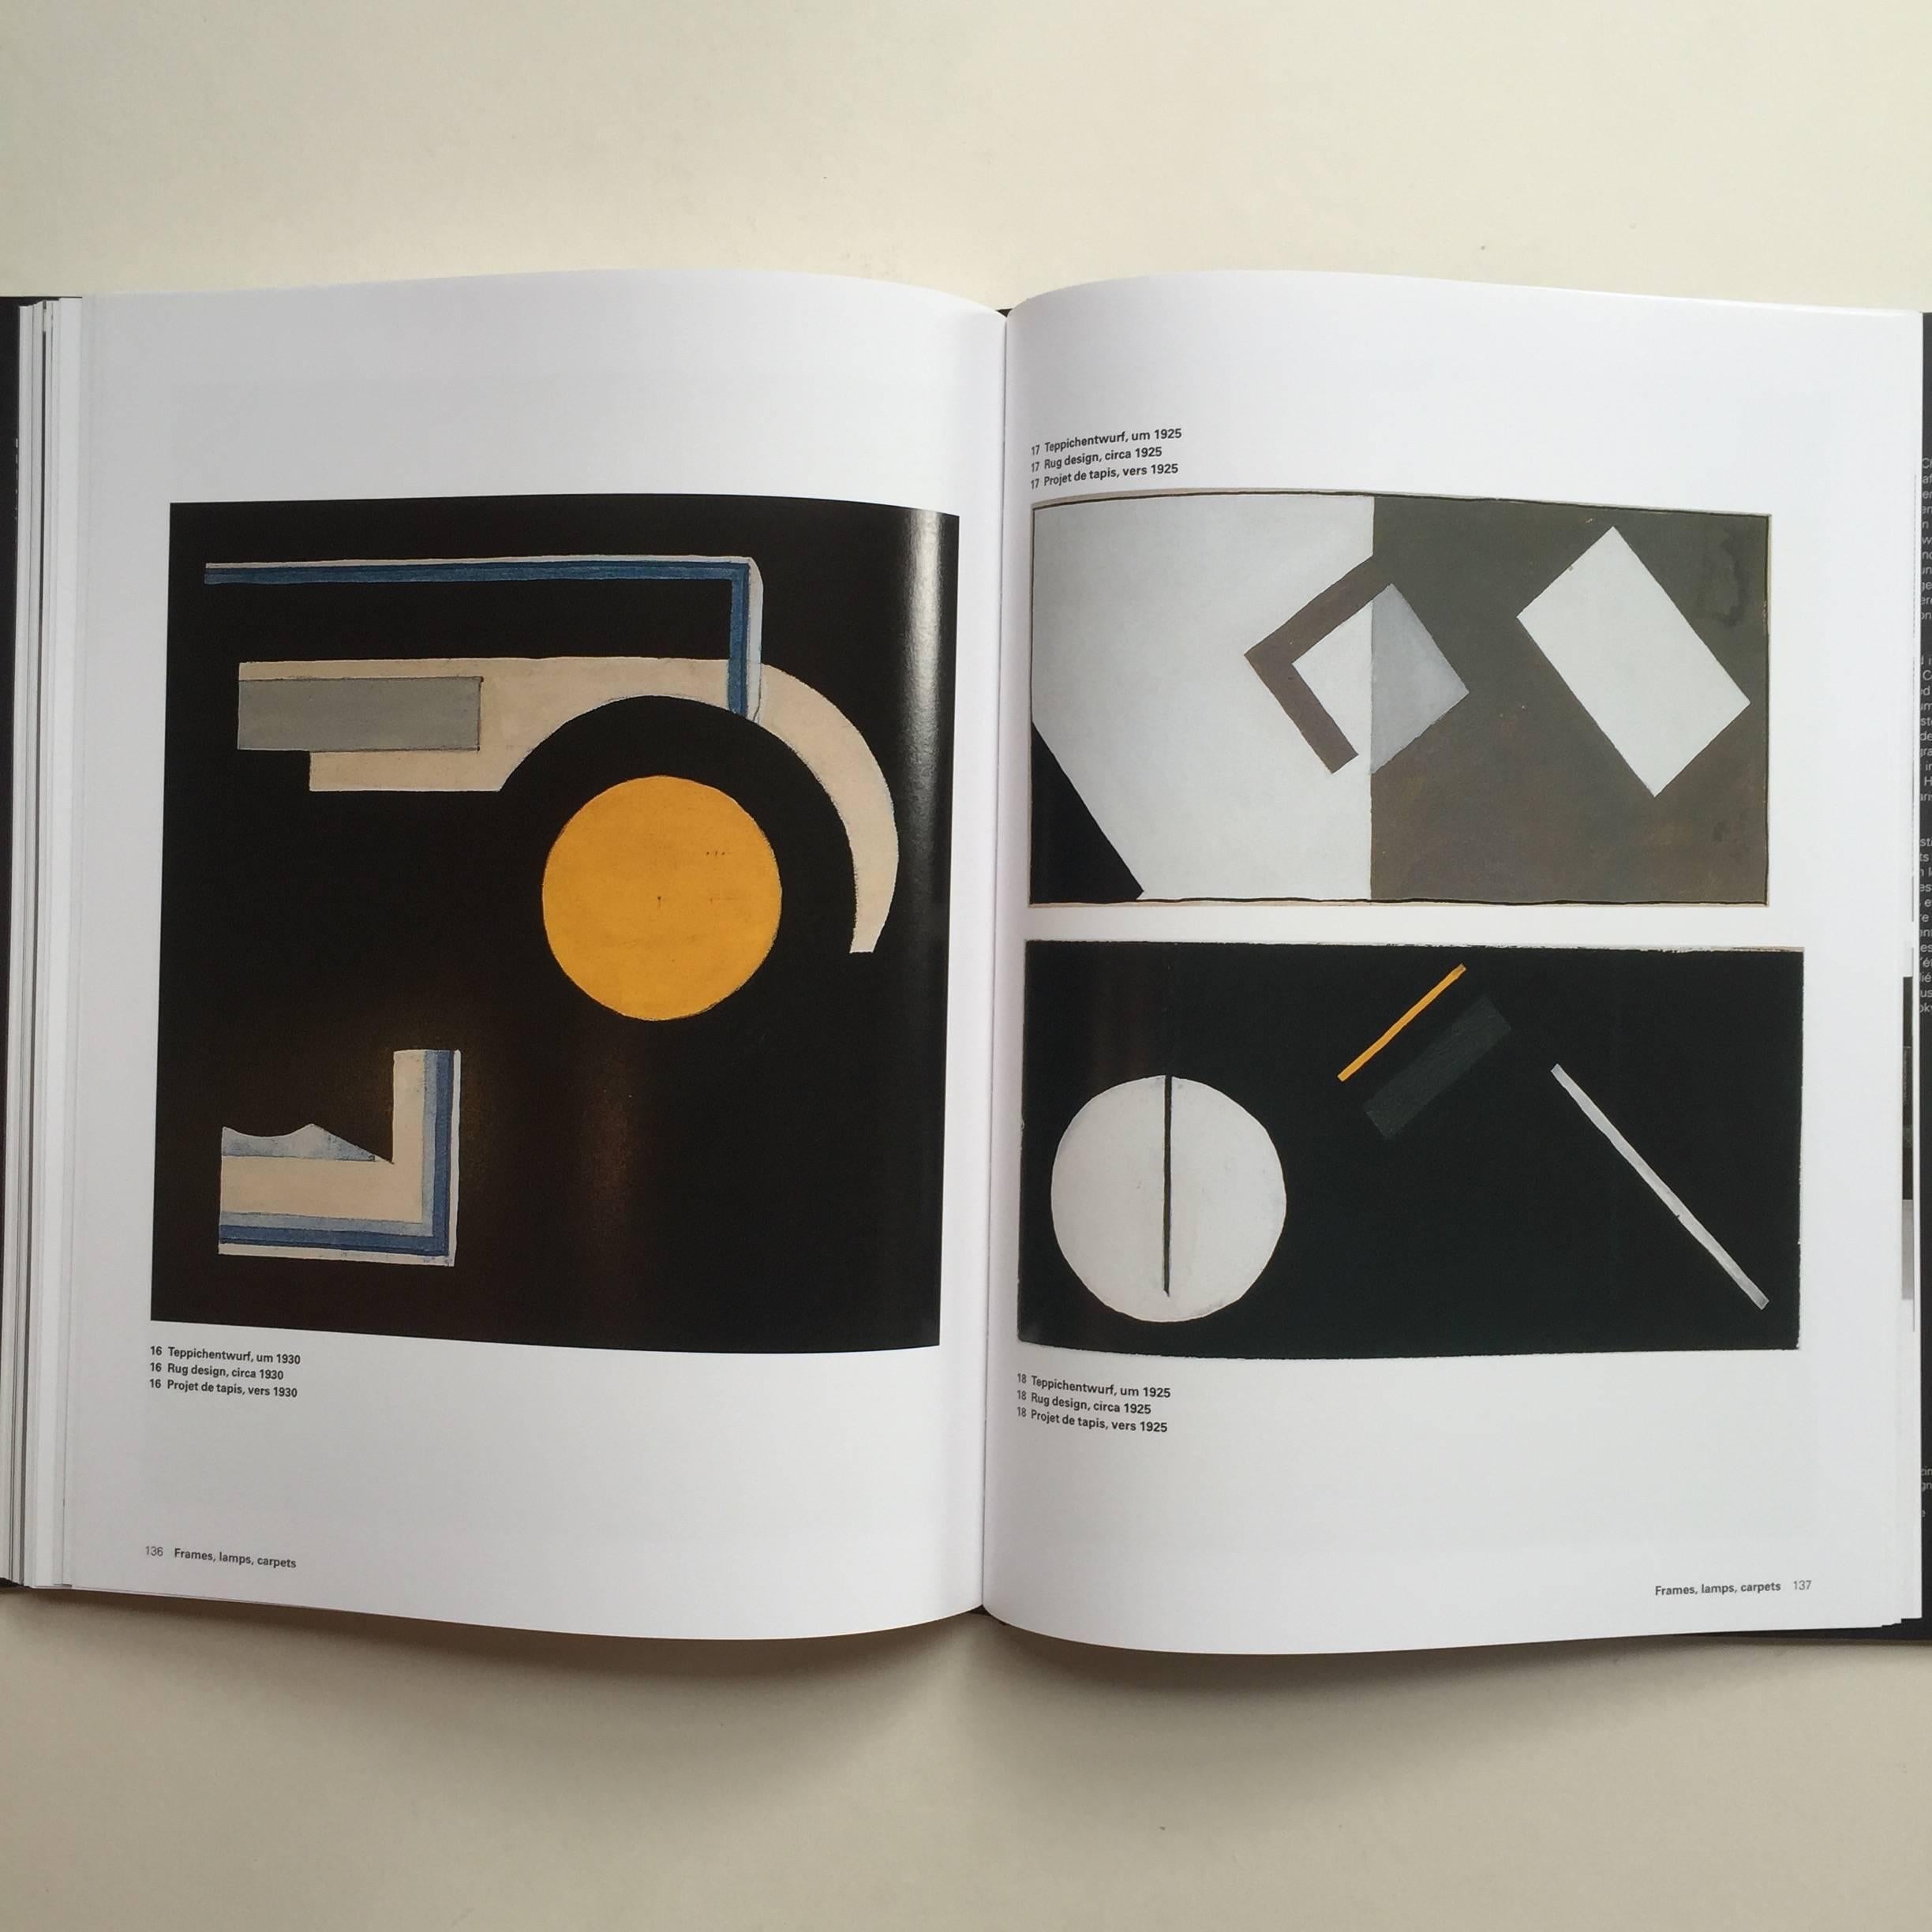 Published by Taschen, 2006

A monograph illustrating Irish furniture designer and architect Eileen Gray’s illustrious career as a furniture-maker and designer, this book demonstrates the extent of Gray’s influence as a peer amongst the likes of